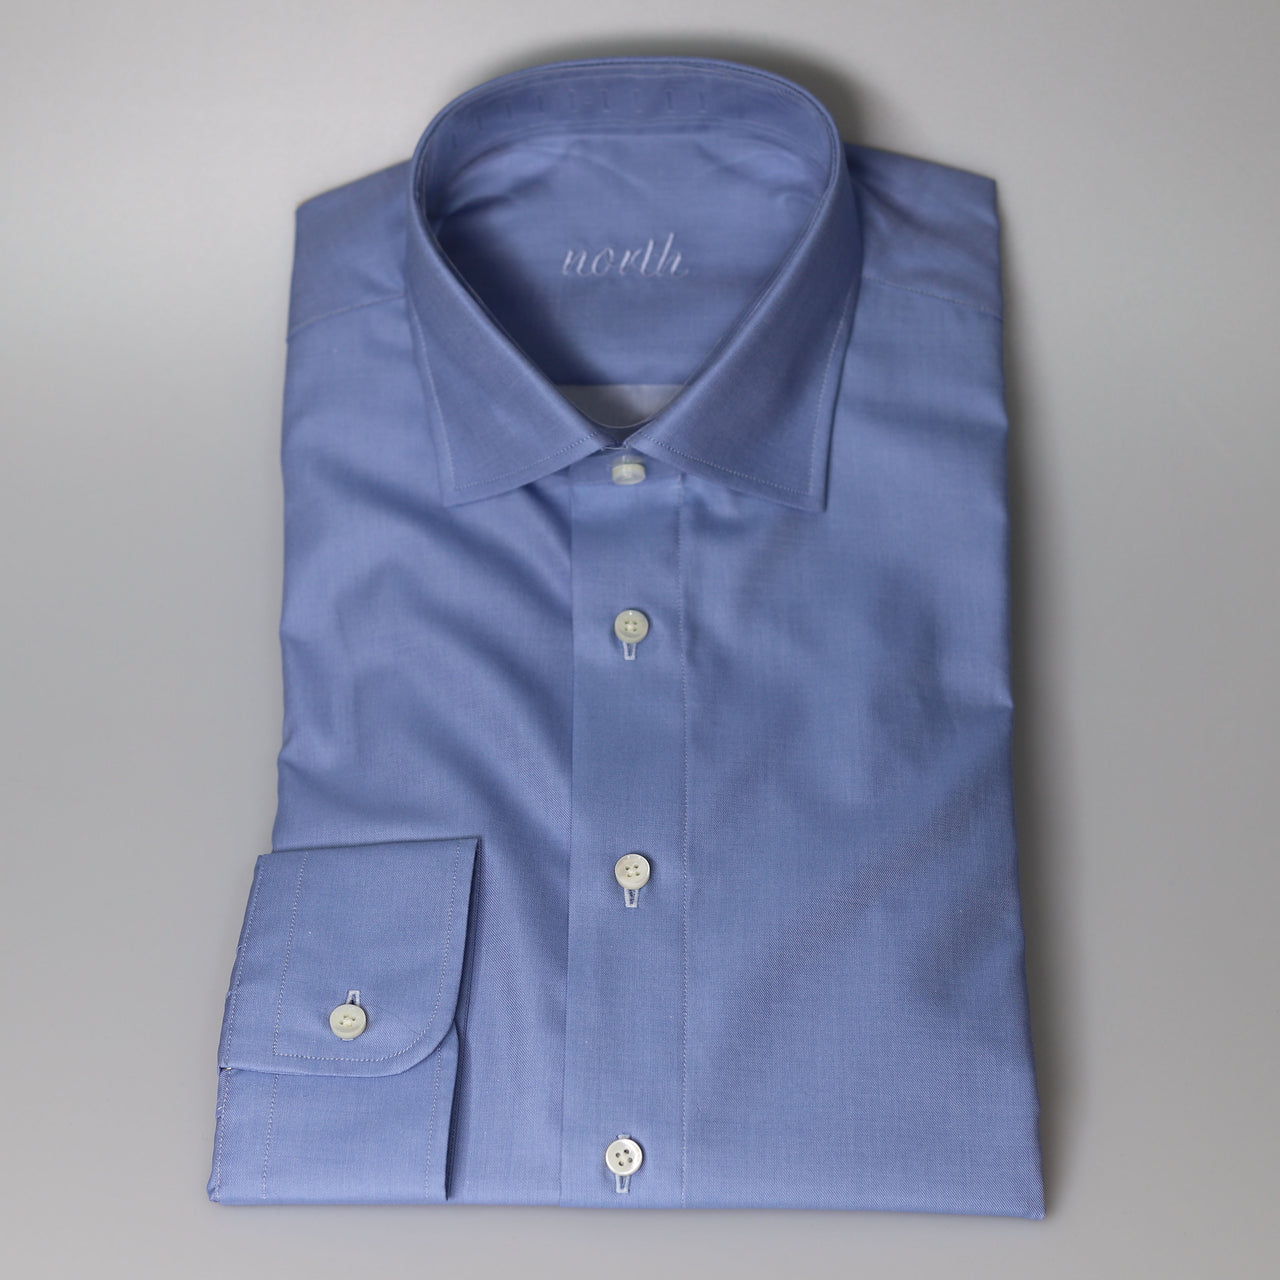 North Twill Easy Care Cotton Shirt